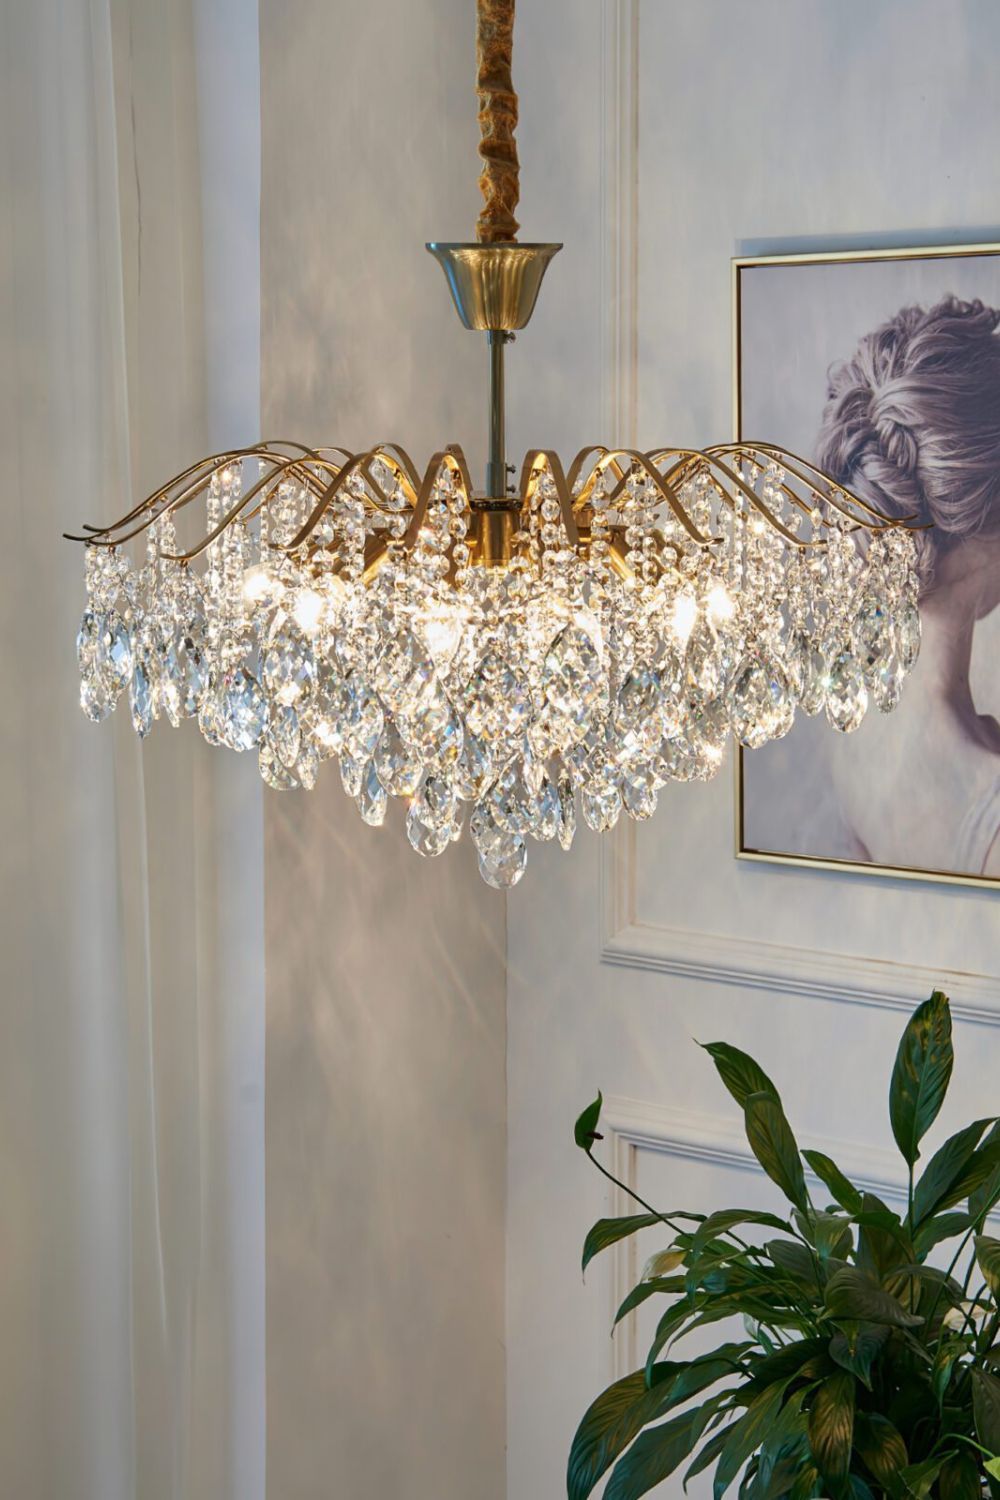 Chandelier For The Bedroom : Enhance Your Bedroom Decor With a Stunning Chandelier